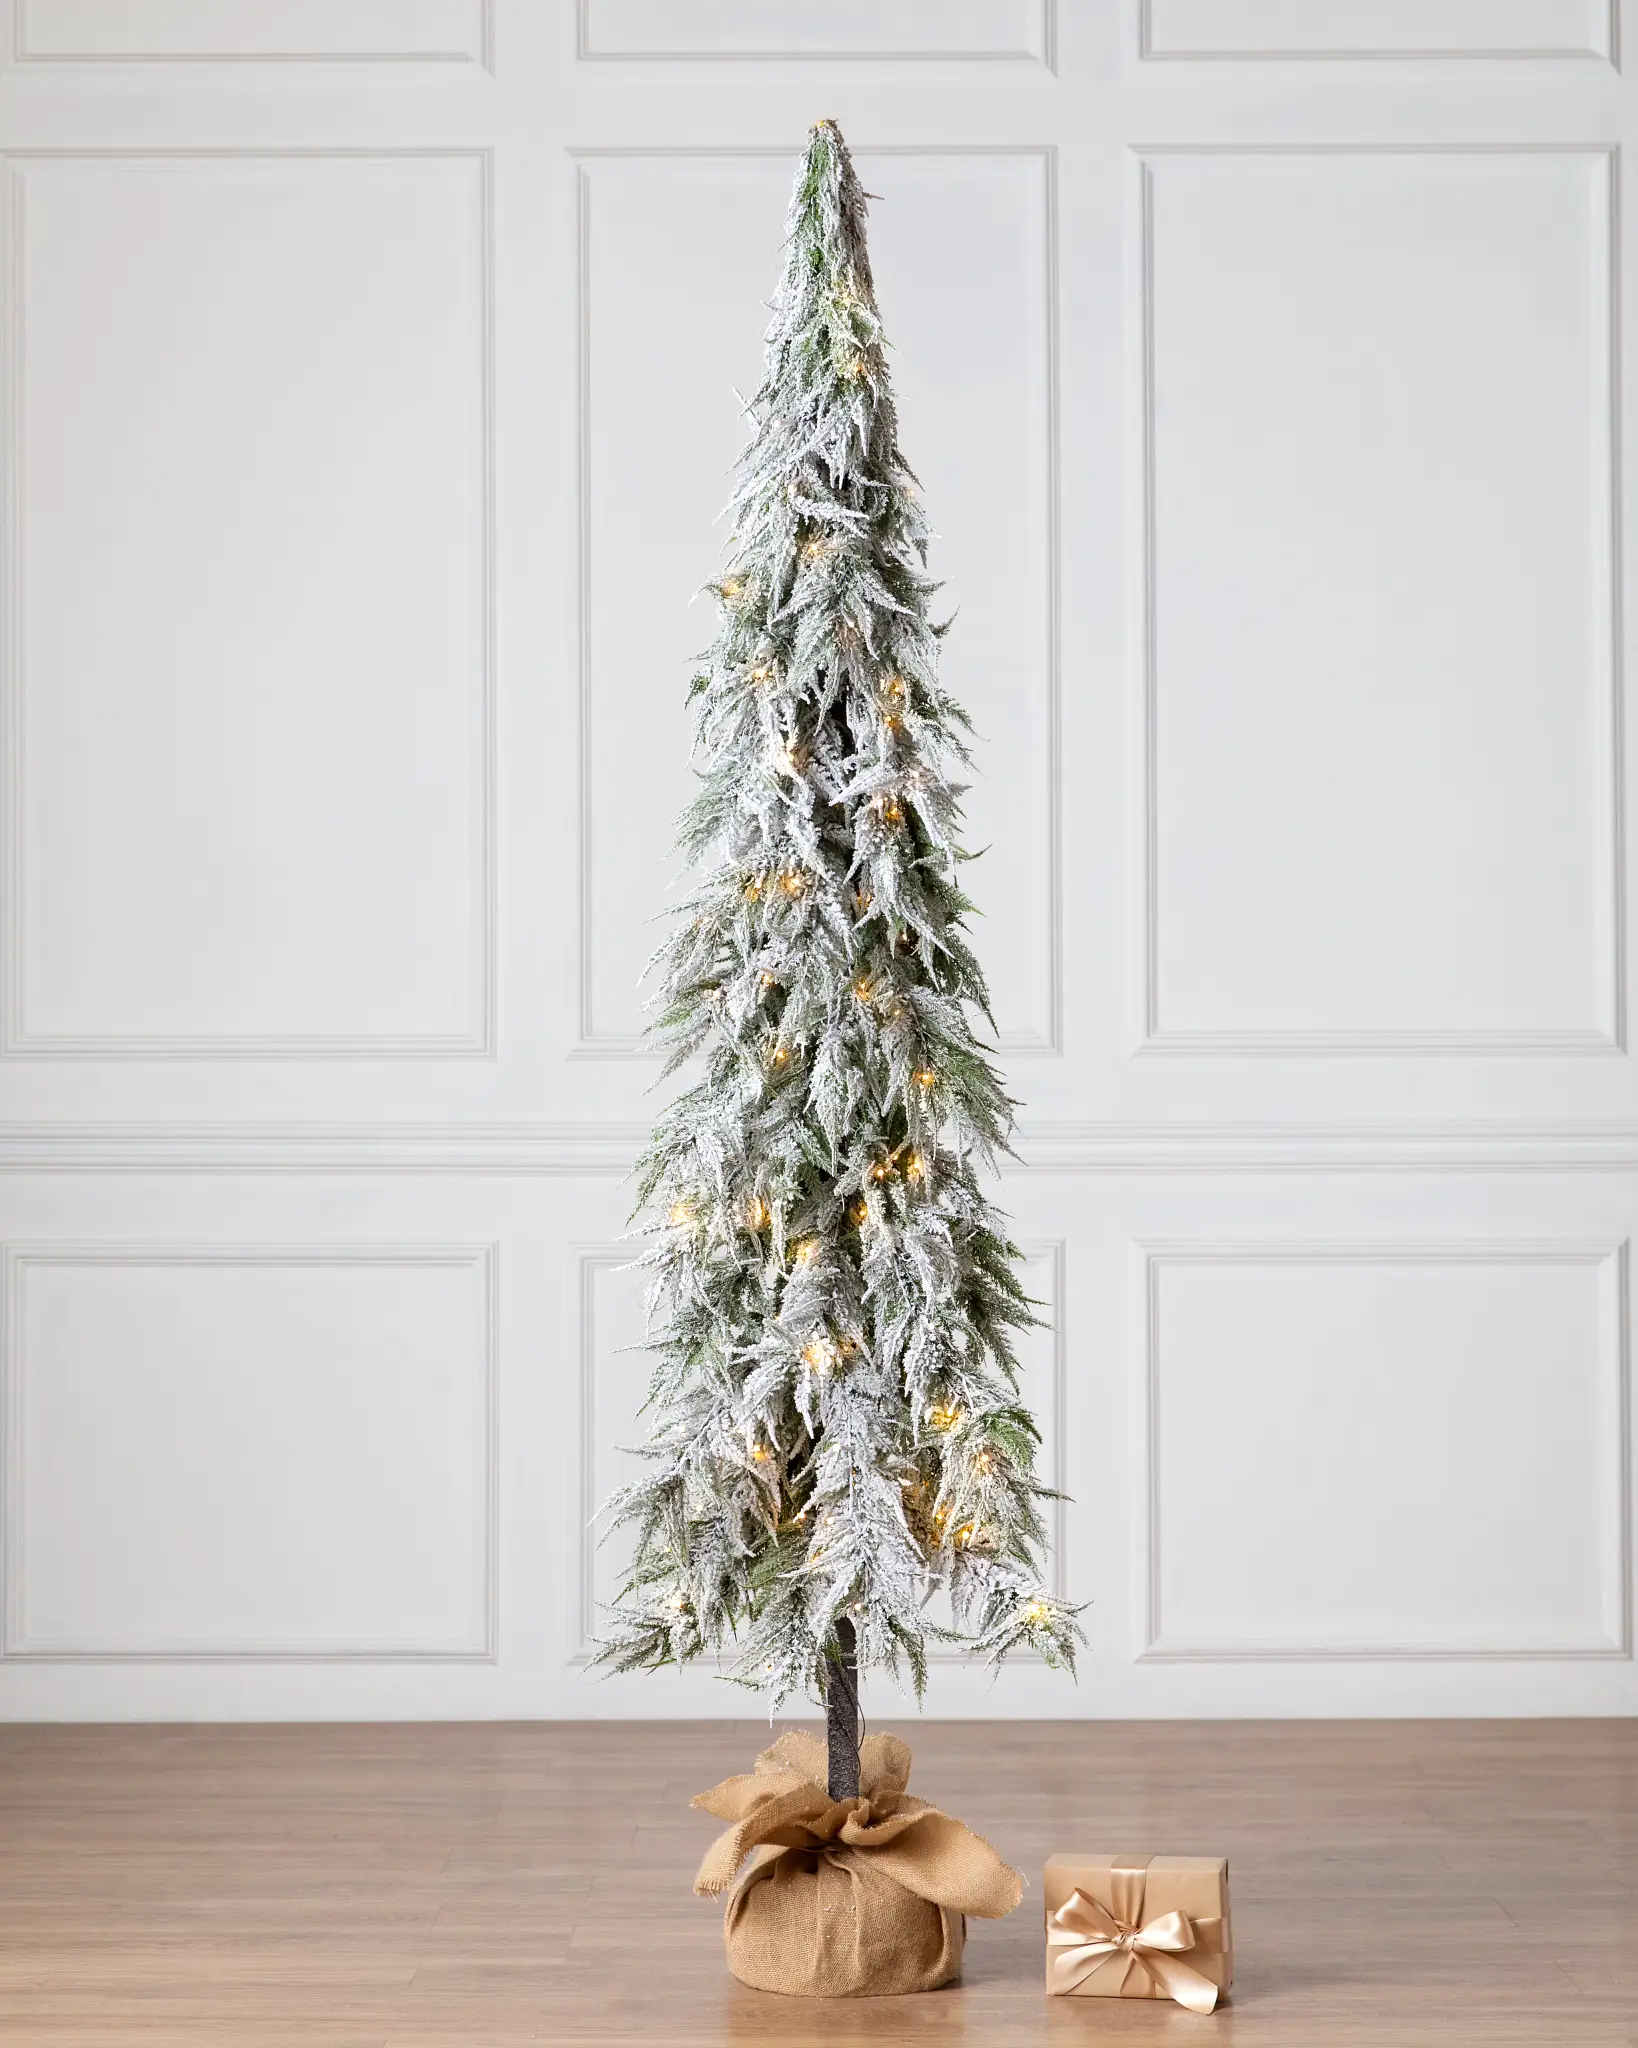 CHRISTMAS TREE TRADITIONAL FESTIVE ARTIFICIAL TREE 2FT,3FT,4FT,5FT,6FT,7FT 